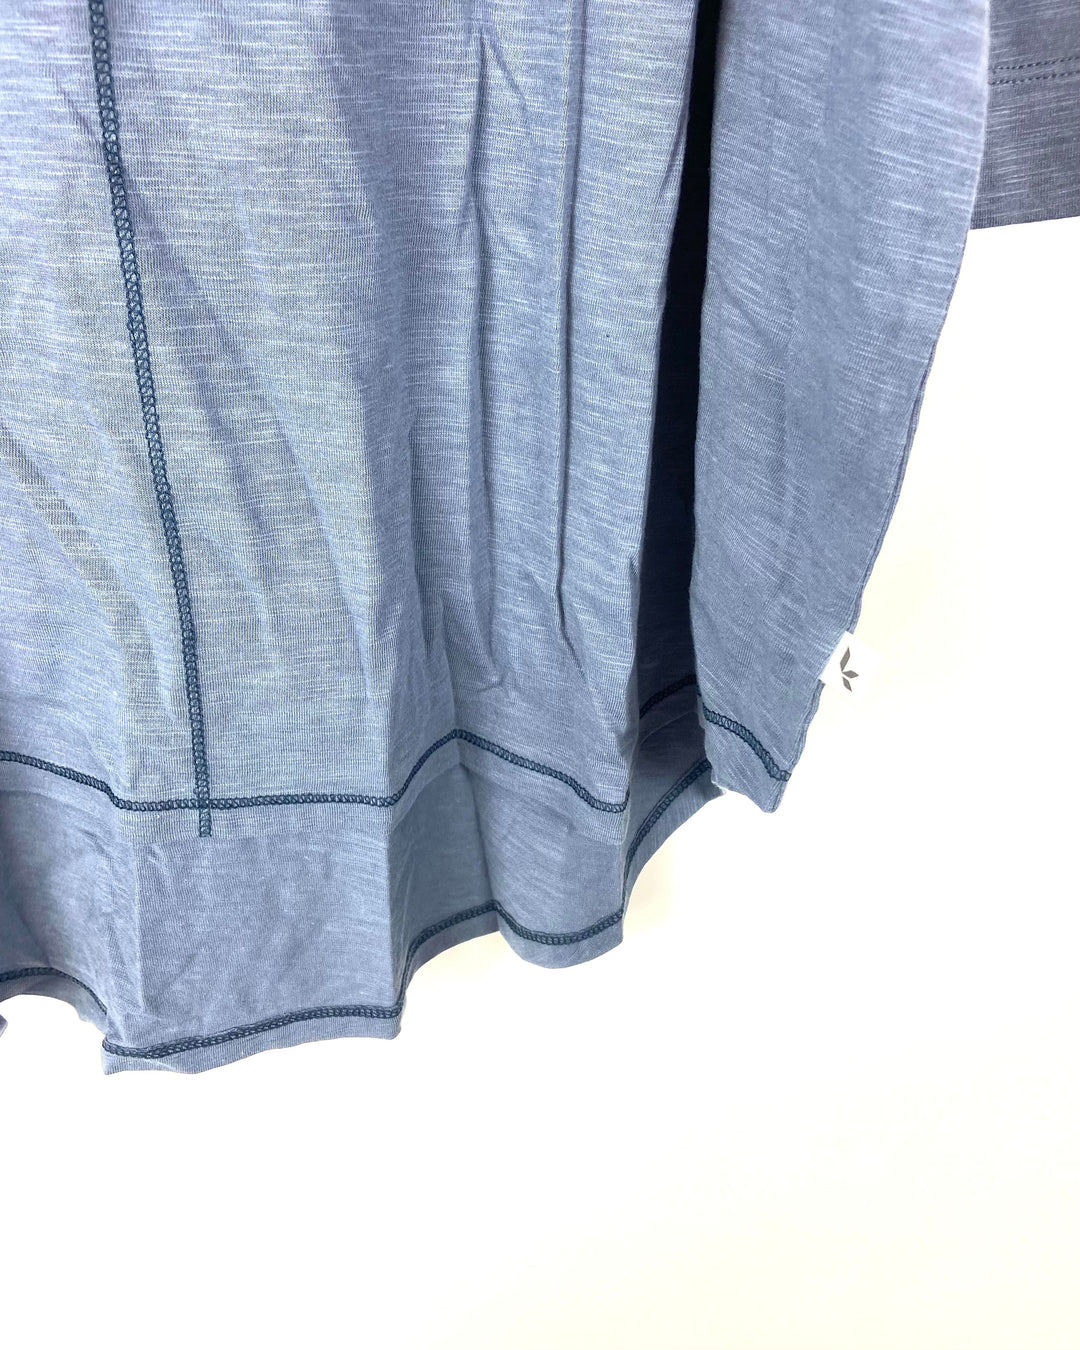 Blue/Grey Long Sleeve Top - Small